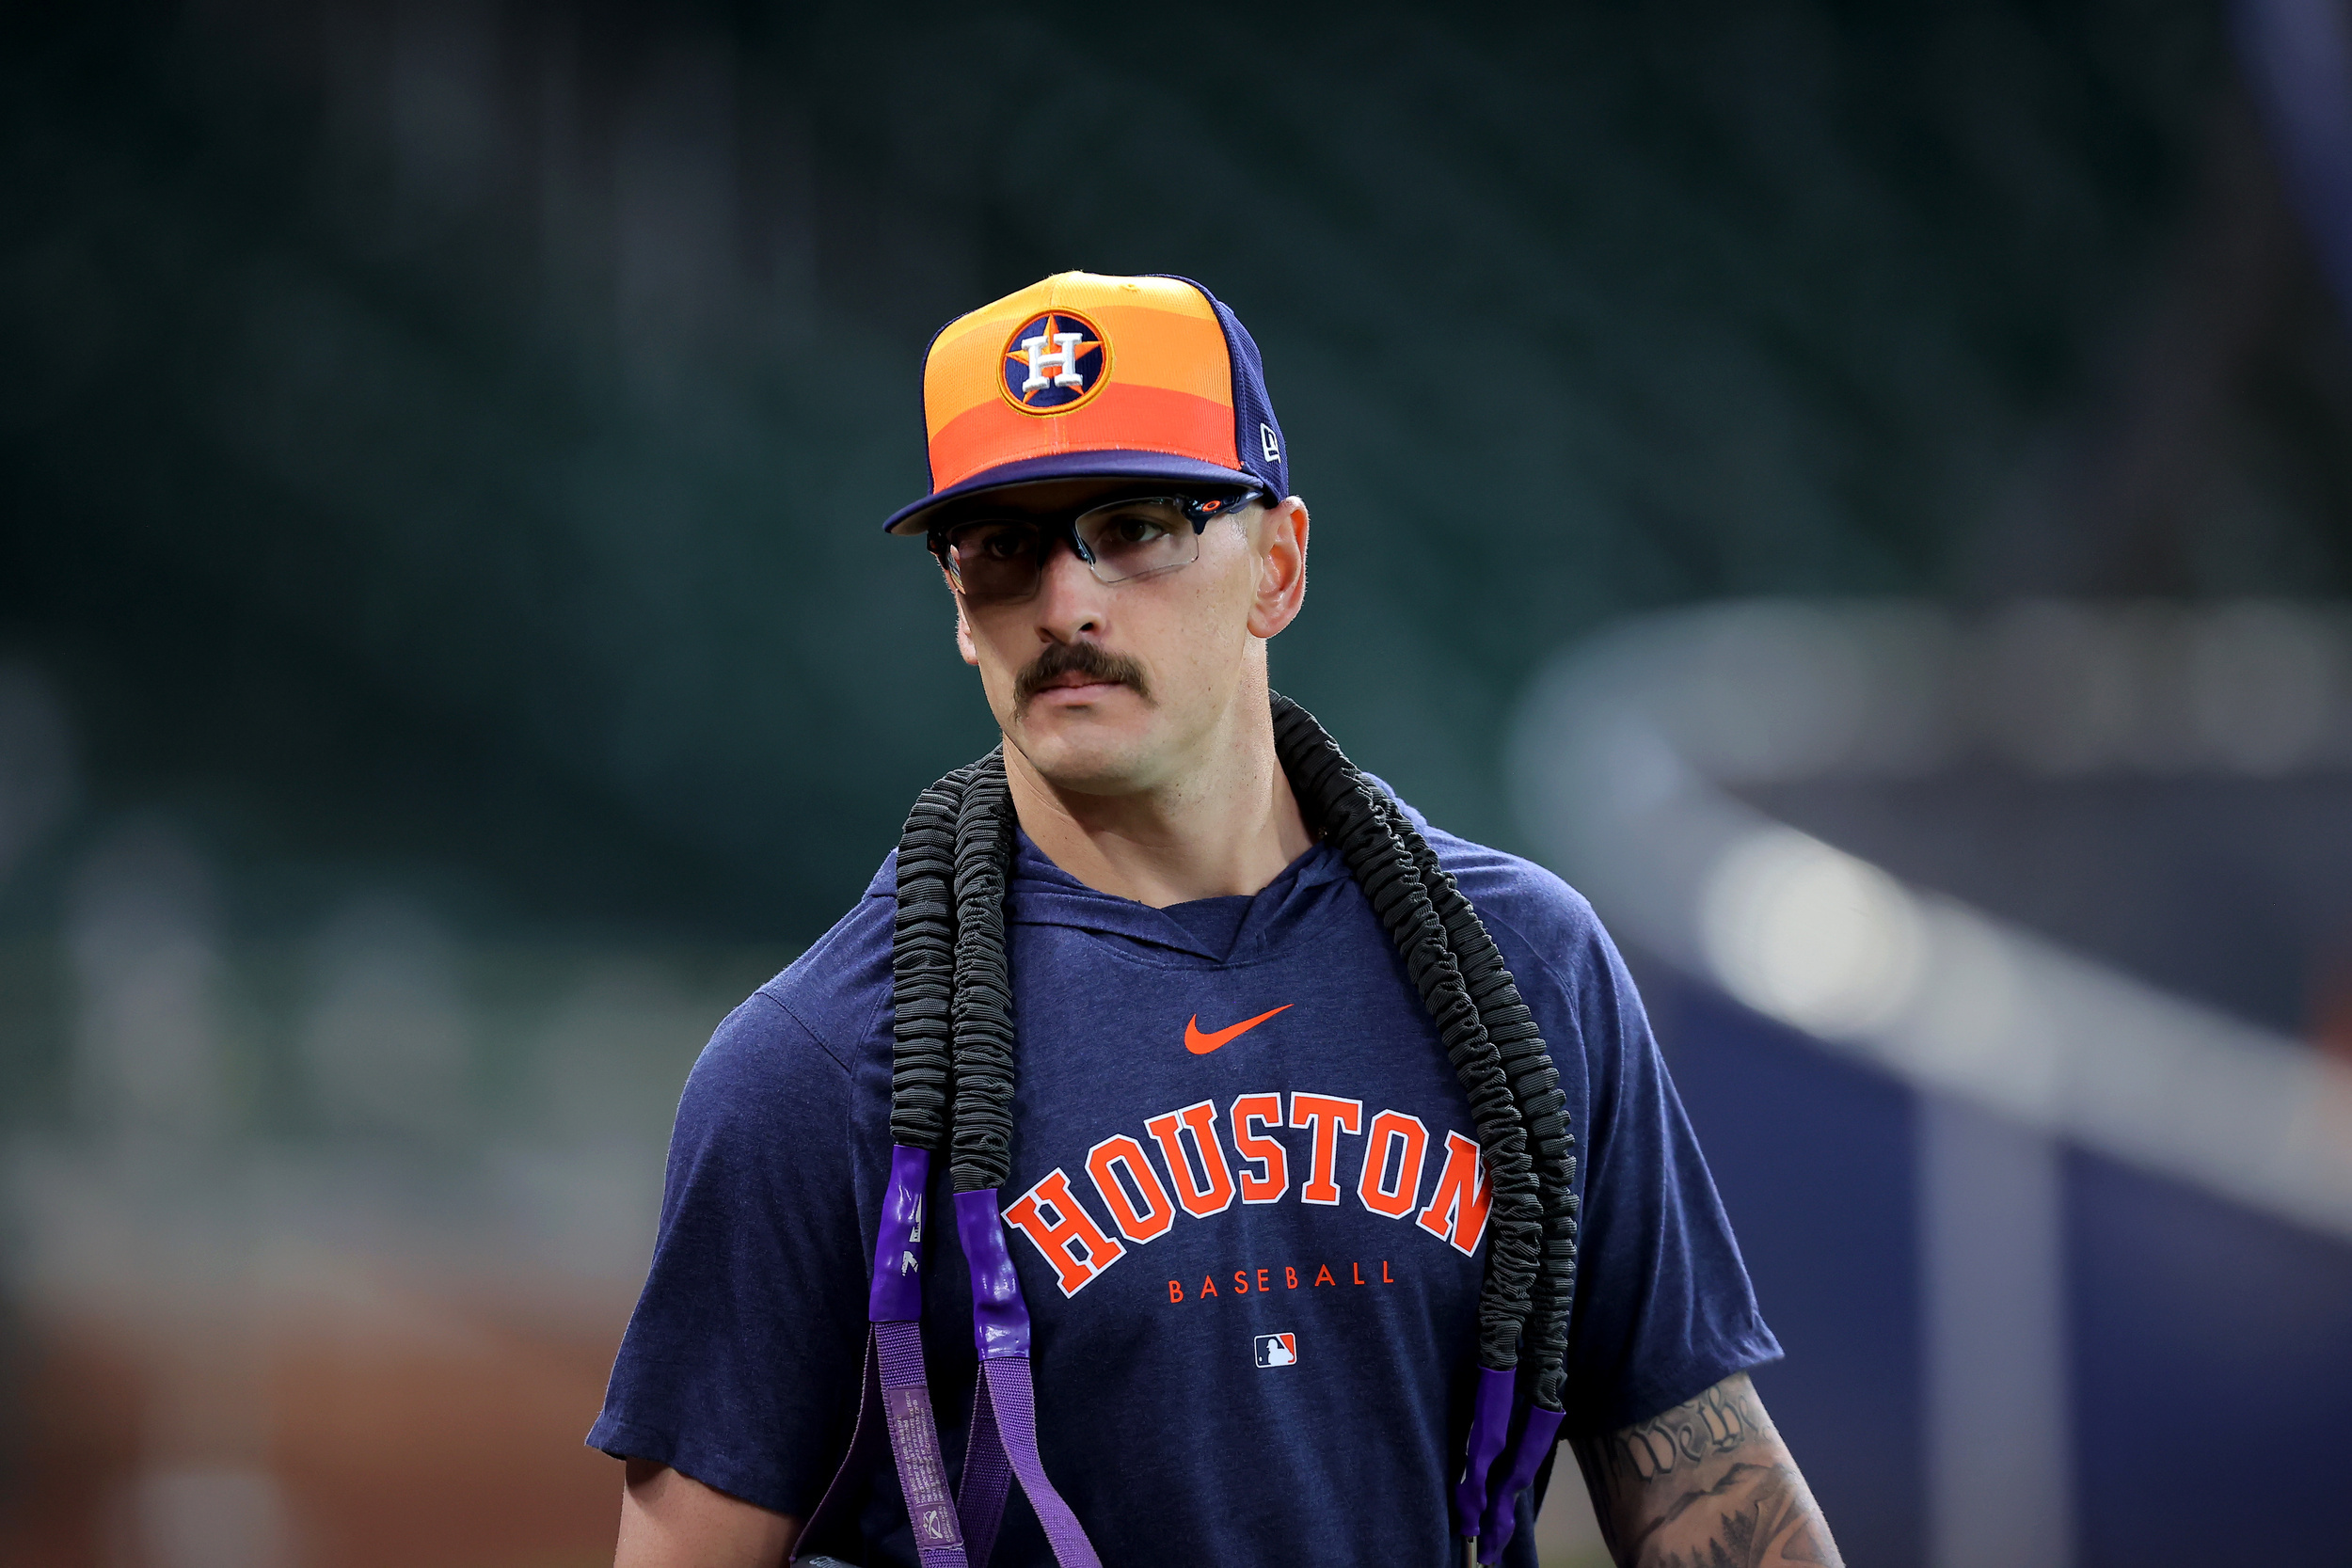 astros starter facing notable absence due to shoulder injury